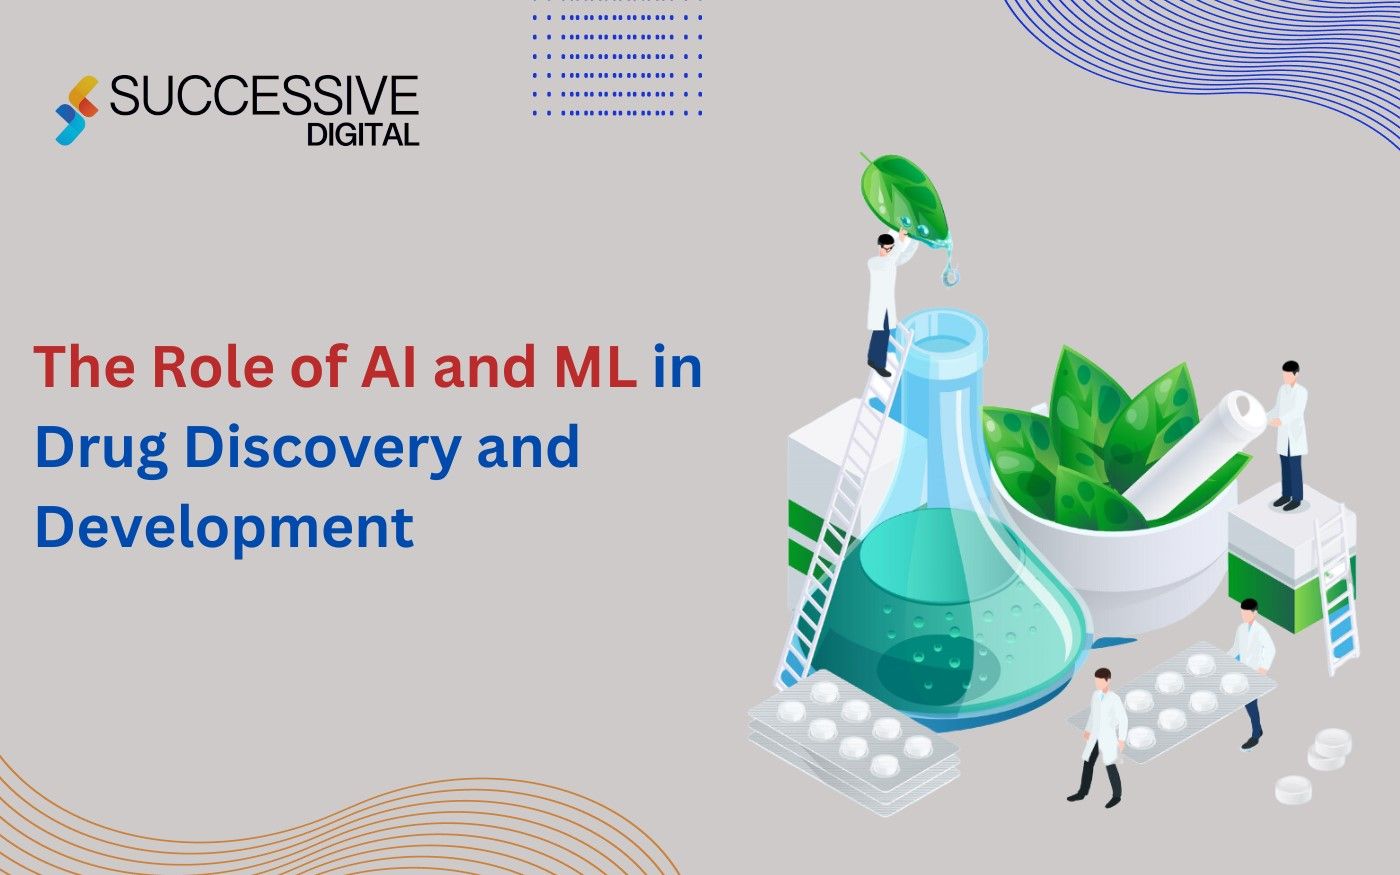 Revolutionizing Healthcare: The Role of AI and ML in Drug Discovery and Development